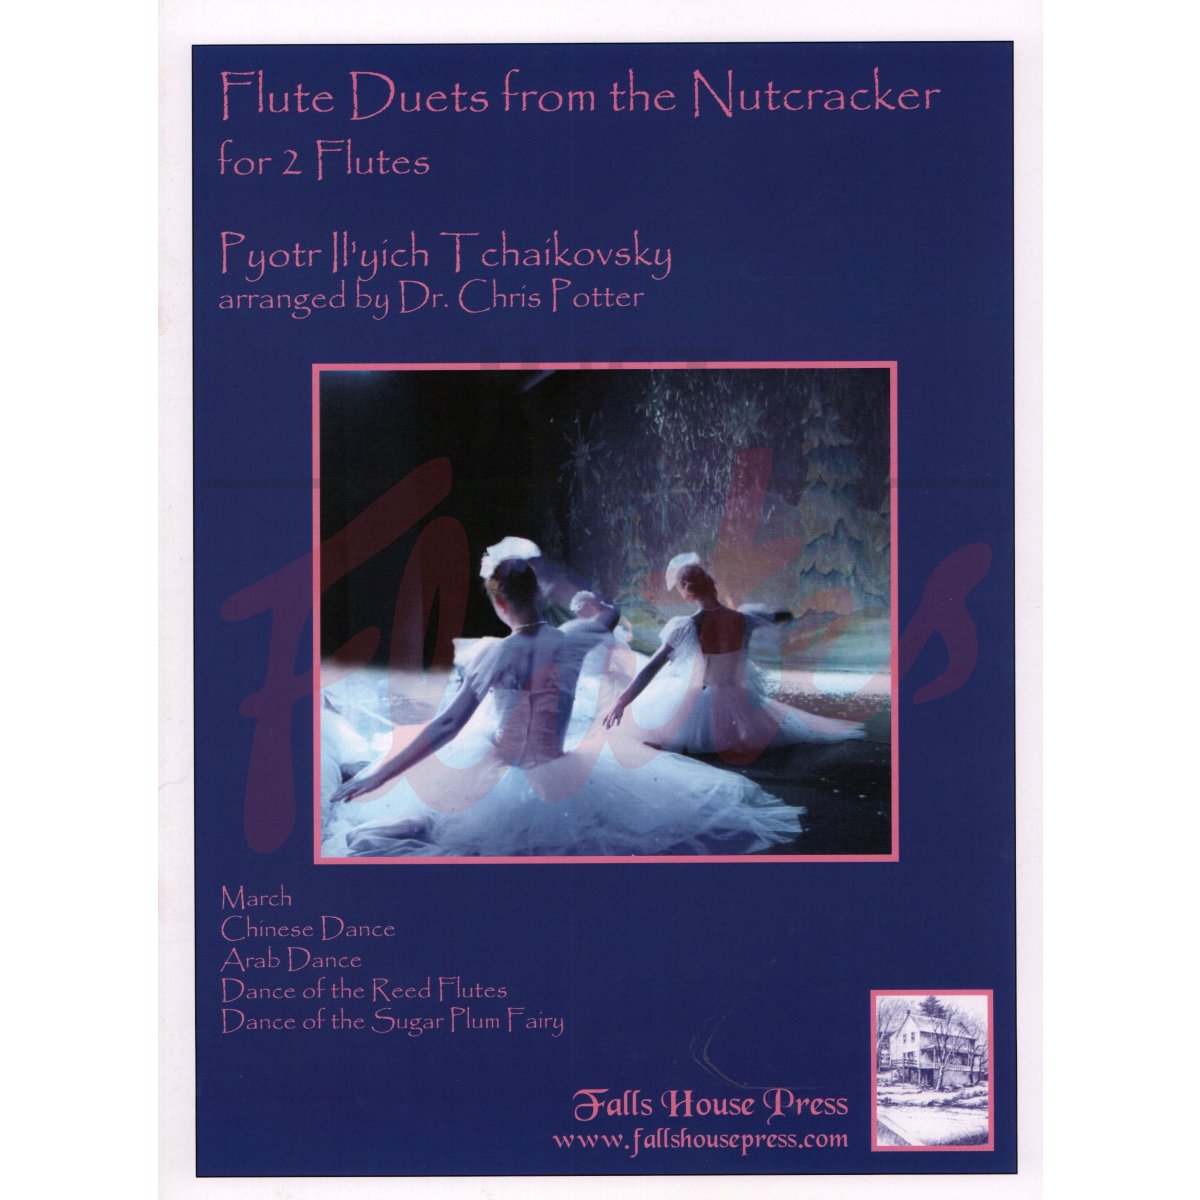 Flute Duets from The Nutcracker